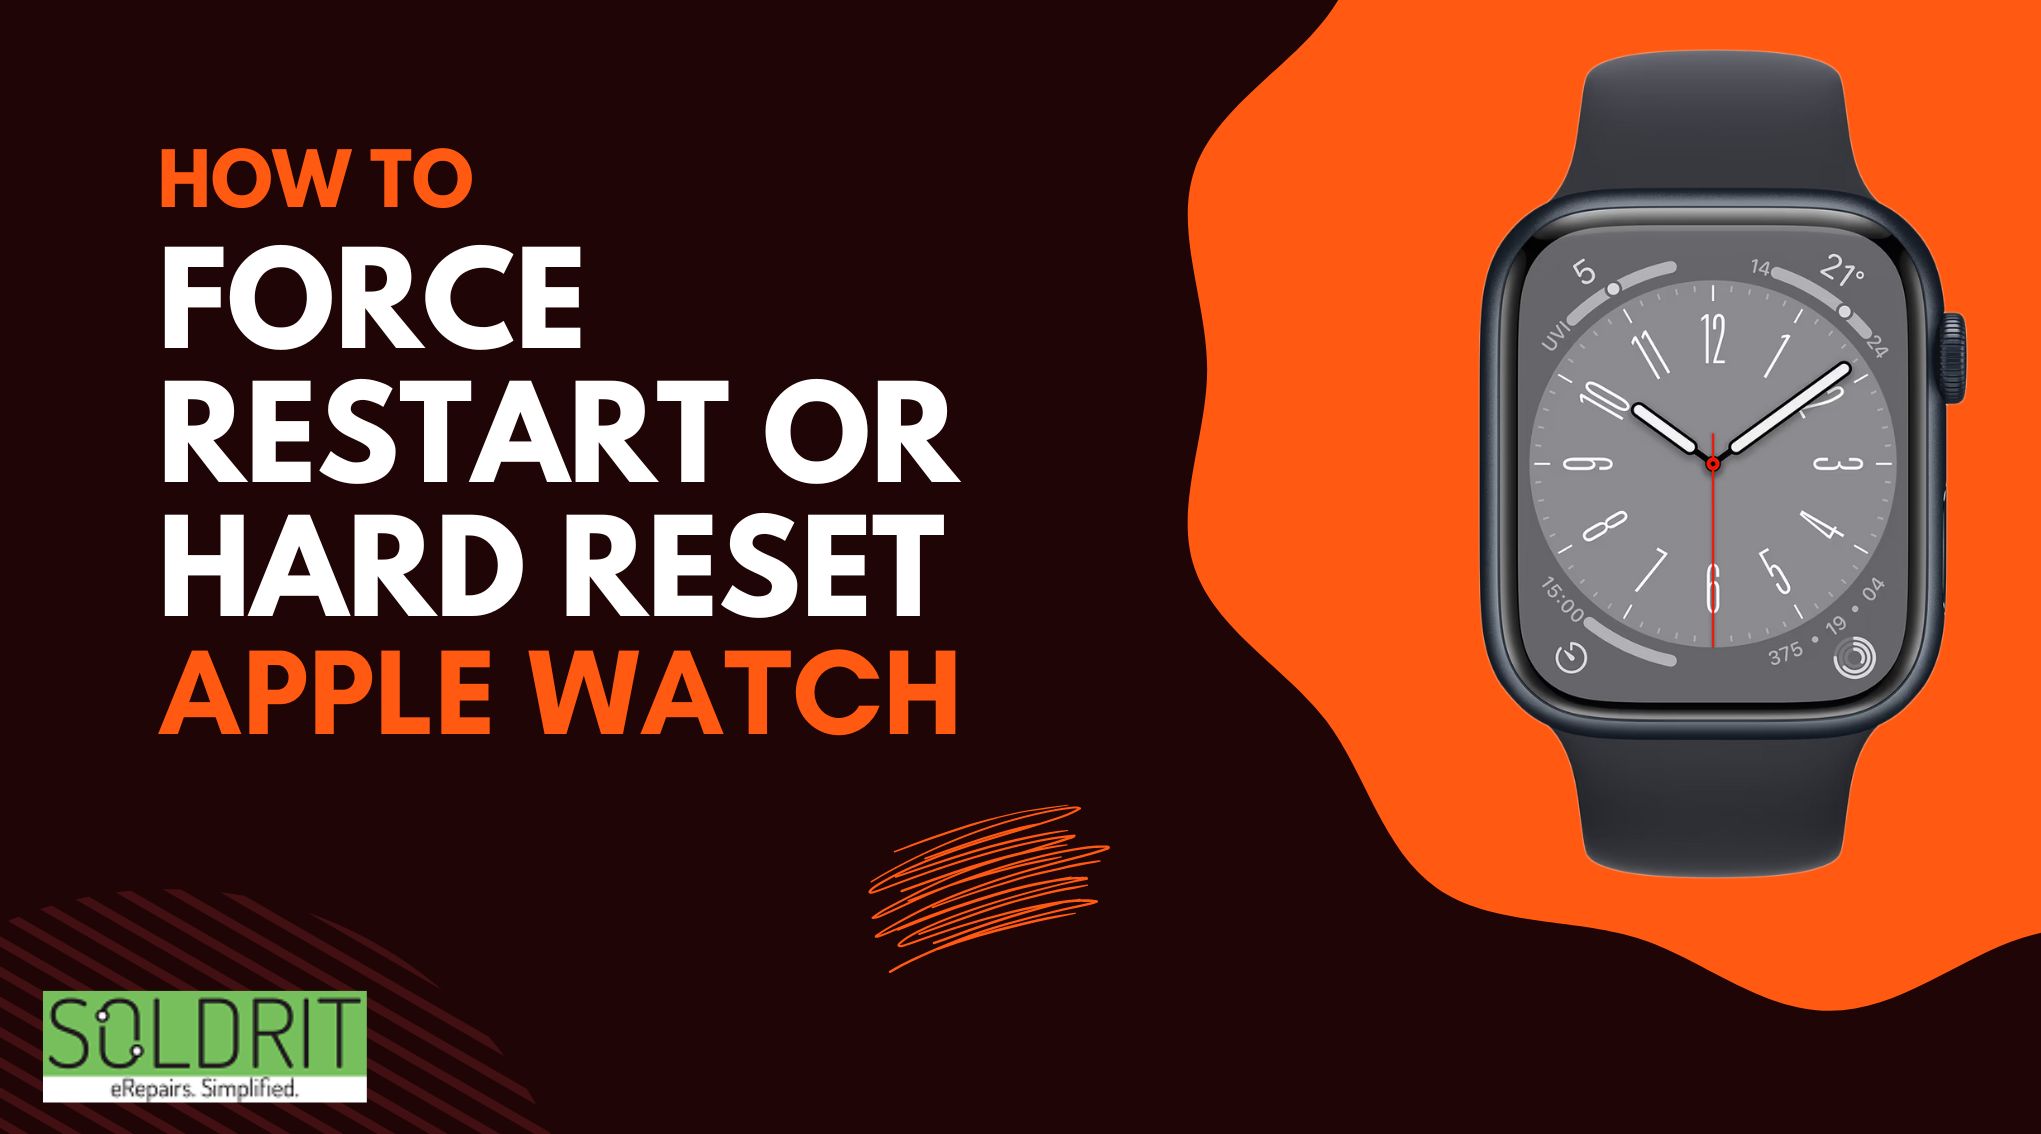 How To Force Restart Or Hard Reset Apple Watch?